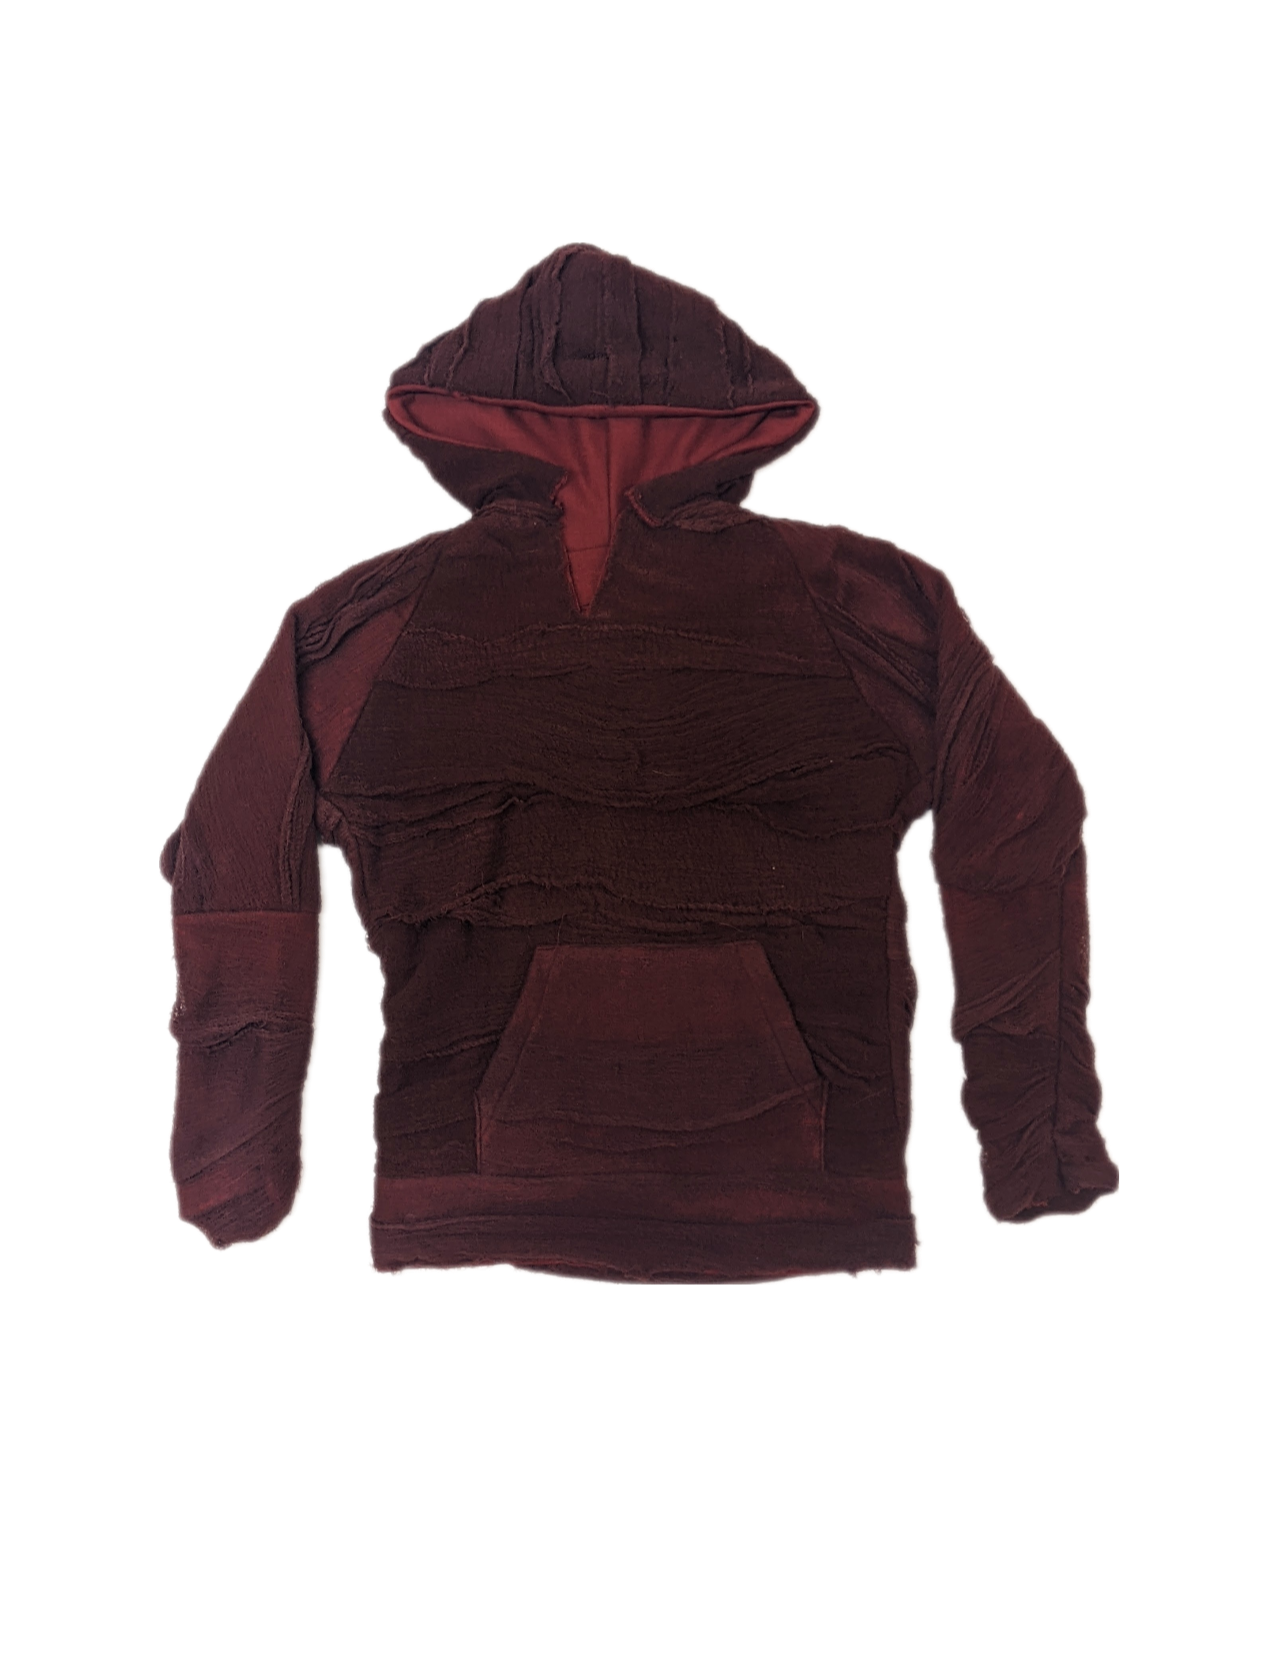 Kimono Back Hoodie in Over Dyed Red Hand stitched Muslin with Red Dead stock Jersey Lining